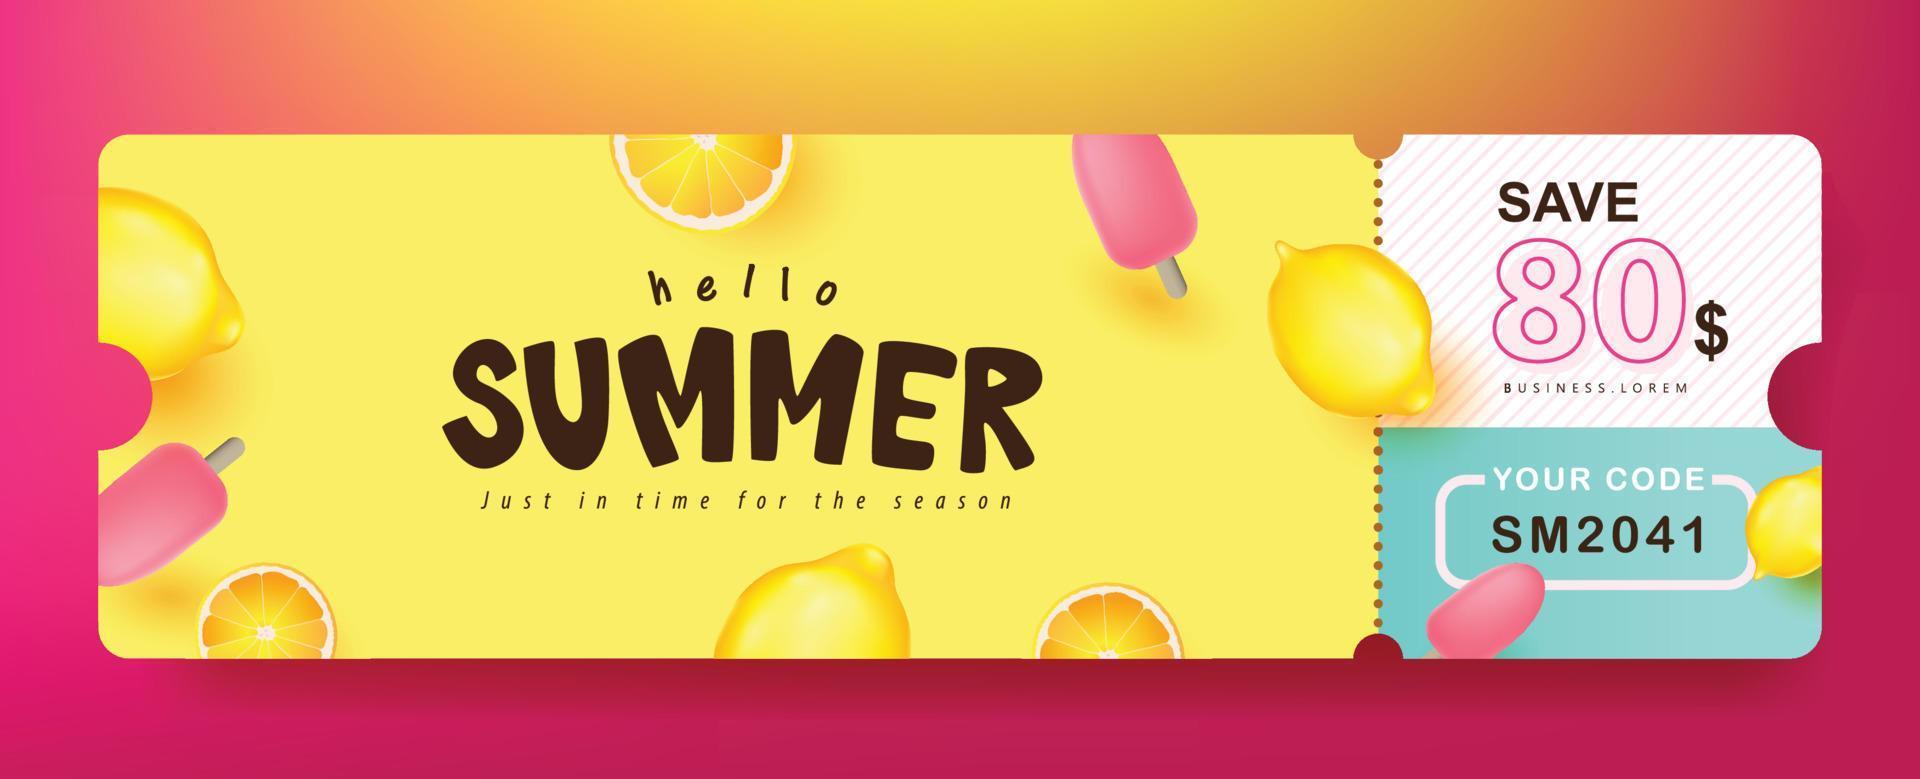 Summer Gift promotion Coupon banner with lemon and pink ice cream vector